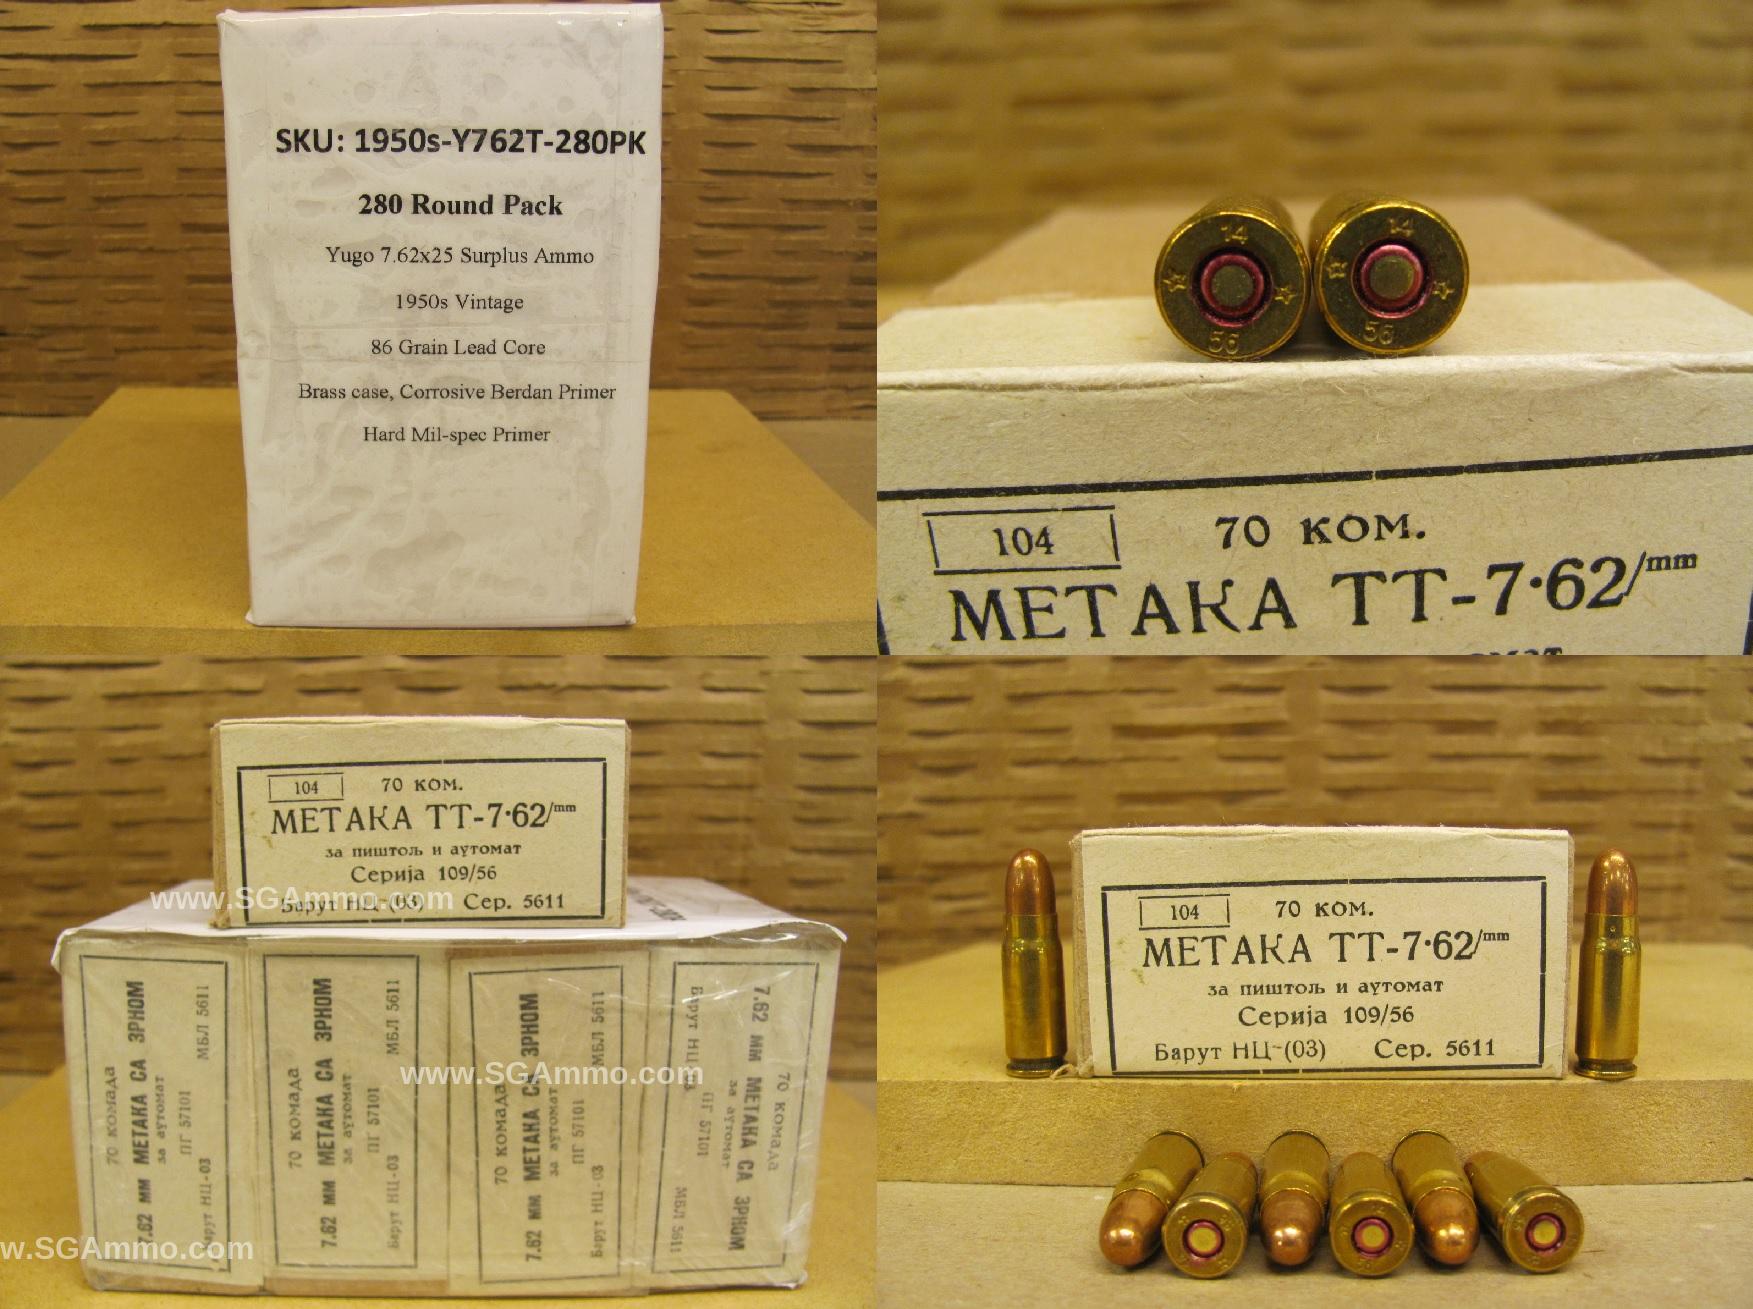 280 Round Pack - Hard Primer 7.62x25 FMJ Yugo Military Surplus Ammo - Made in 1950s by PPU - Read Description